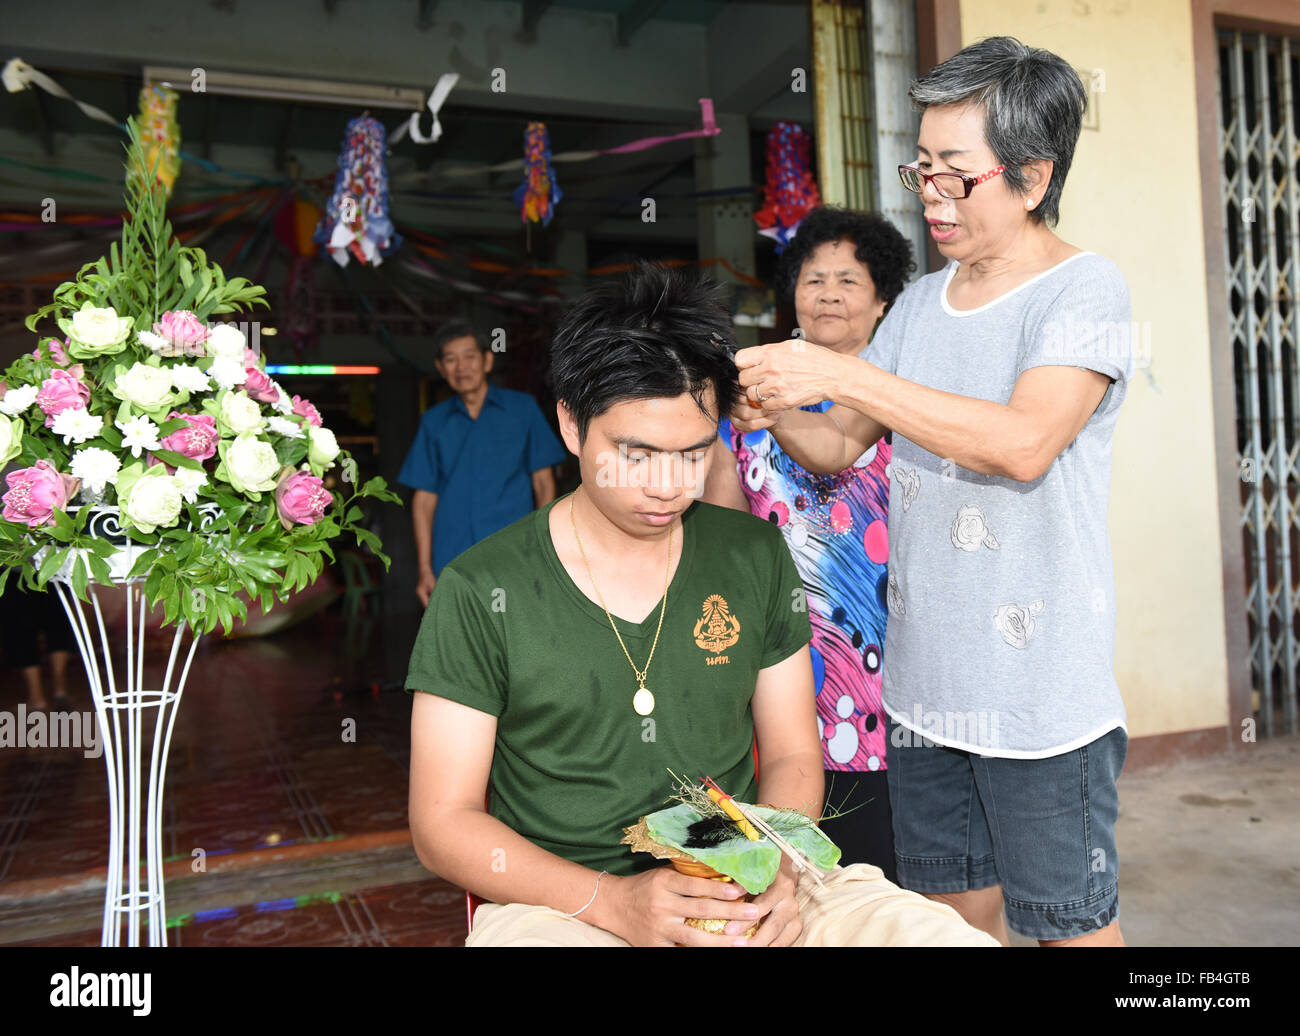 Nakhonnayok-Thailand ,July 3 : Shaved ordained Buddhist ceremony in Thailand. Thai man gets his head shaved JULY 3 , 2015 Stock Photo